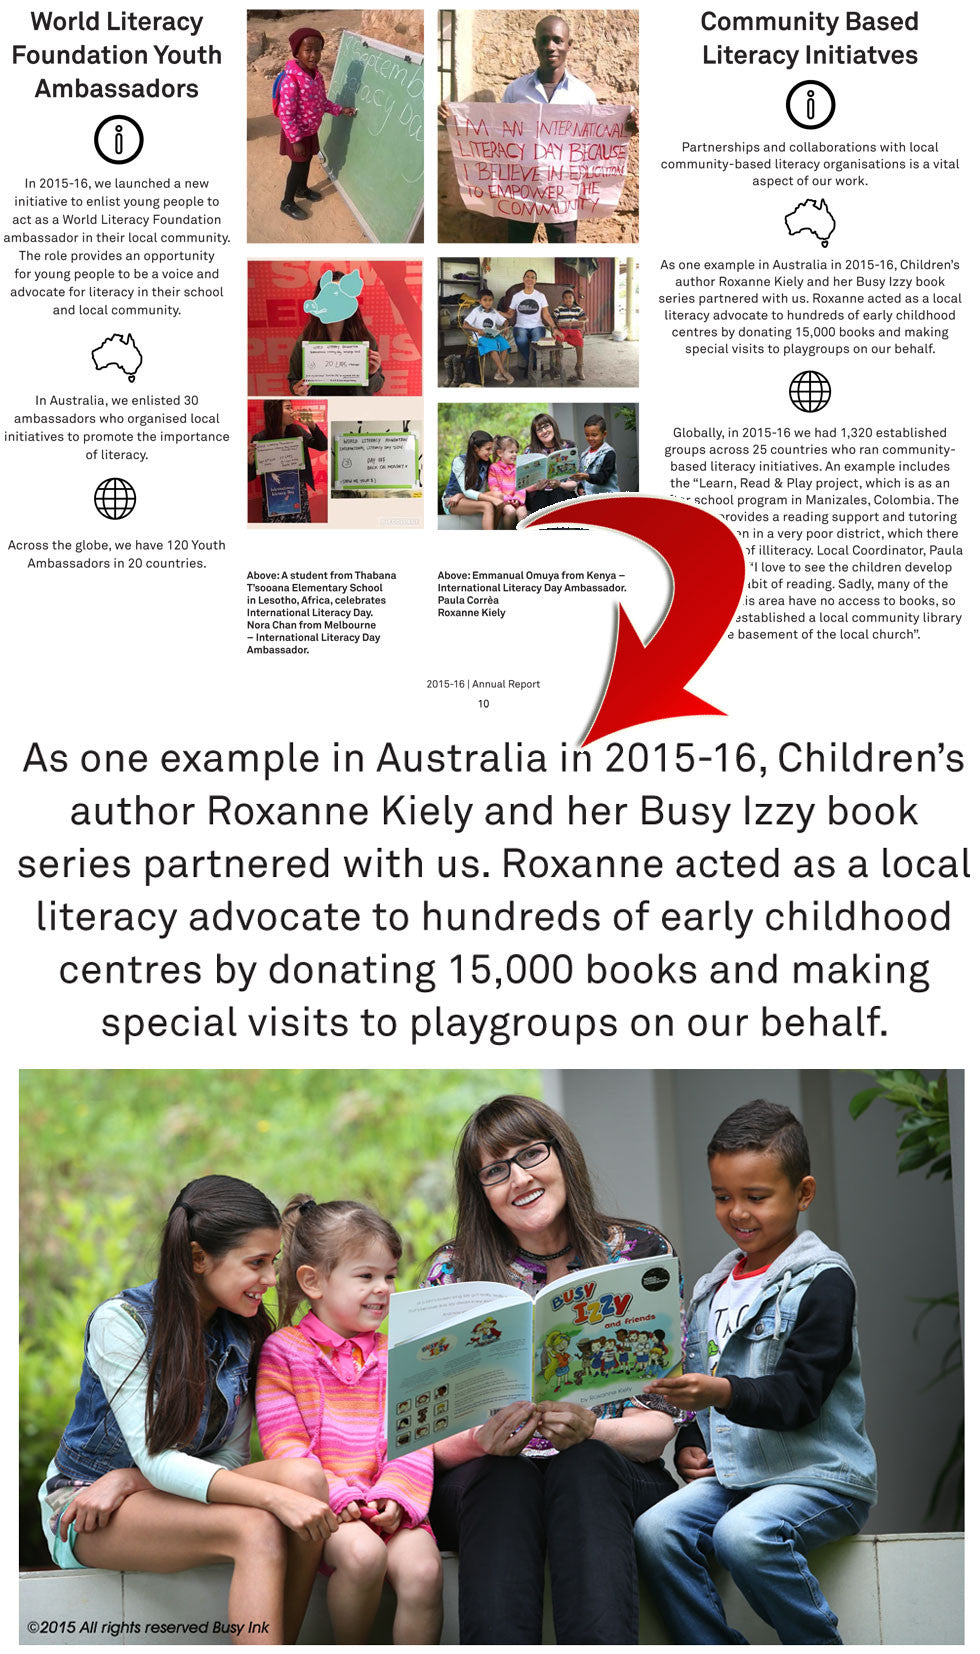 World Literacy Foundation Annual Report 2015-16 referencing Roxanne Kiely and the Busy Izzy project